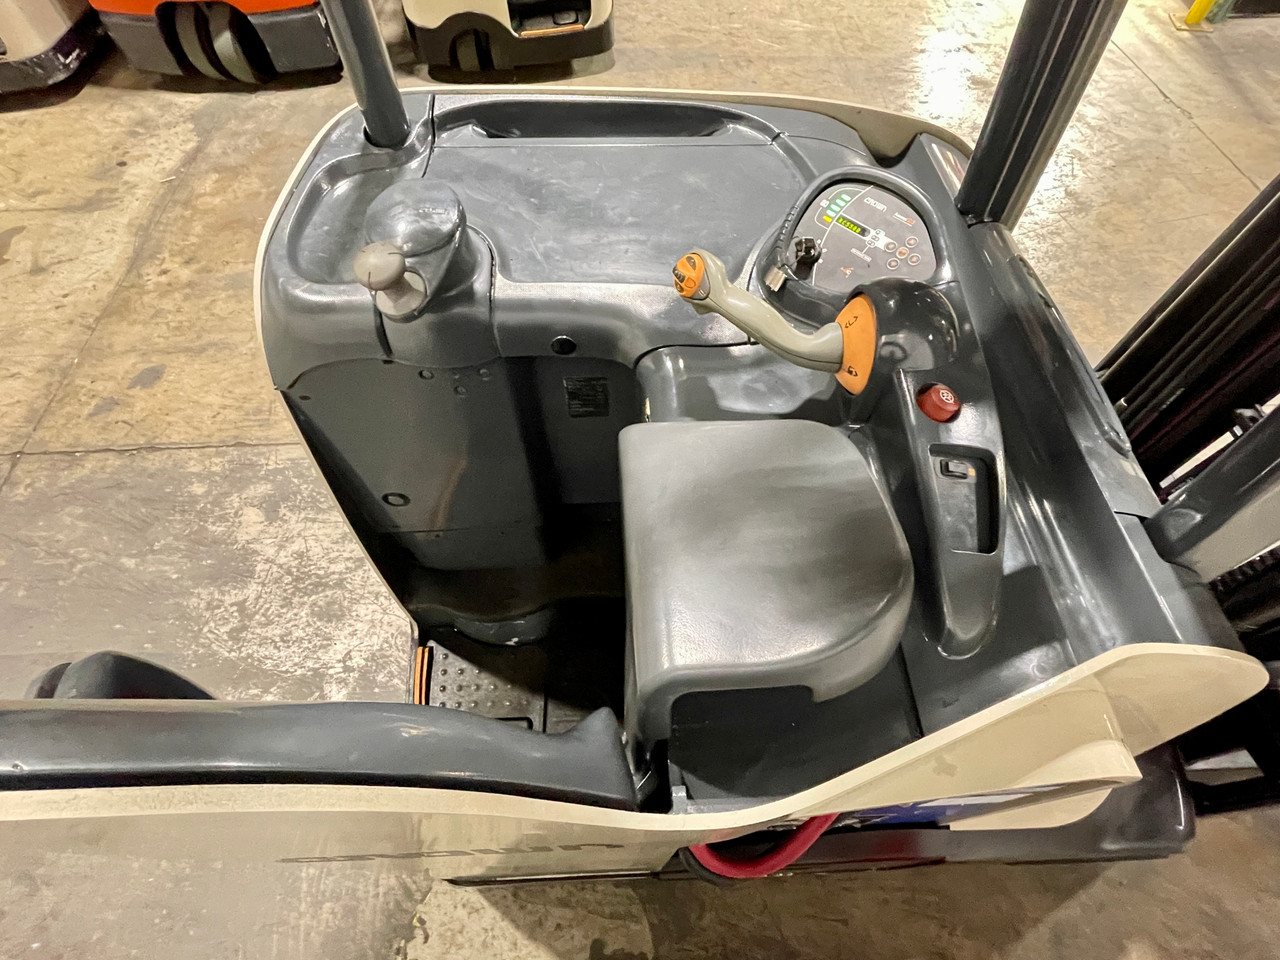 2014 Crown Electric Narrow Aisle Forklift 2018 Enersys Deserthog Tested Battery Height  83"/190" Stock # 4820